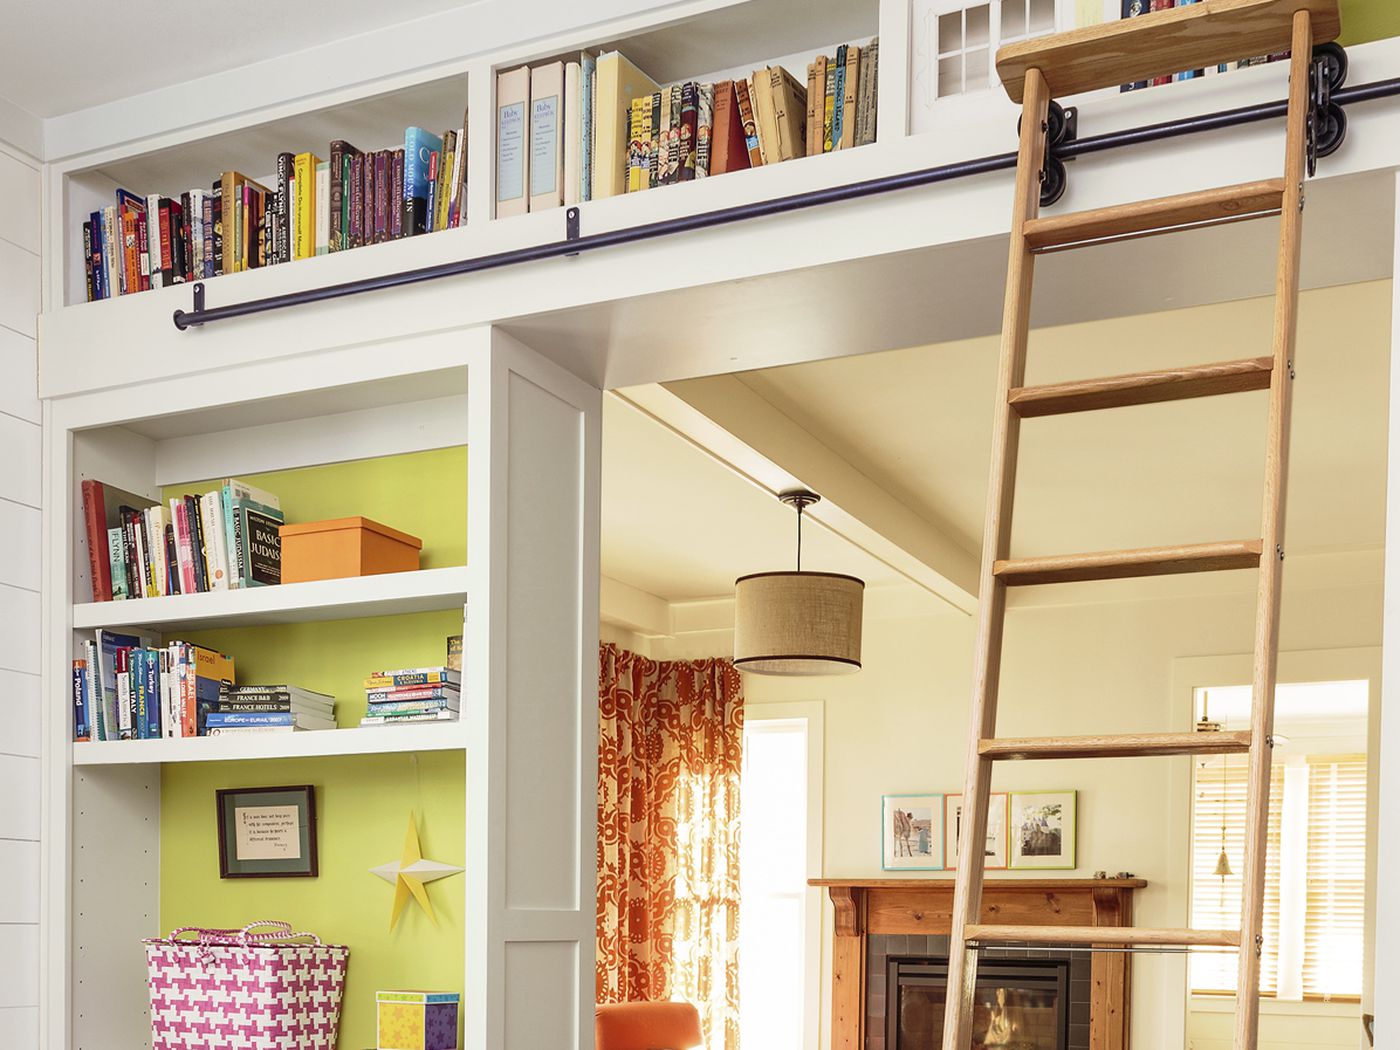 7 Surprising Built In Bookcase Designs This Old House,Roasted Whole Chicken Recipe Ideas